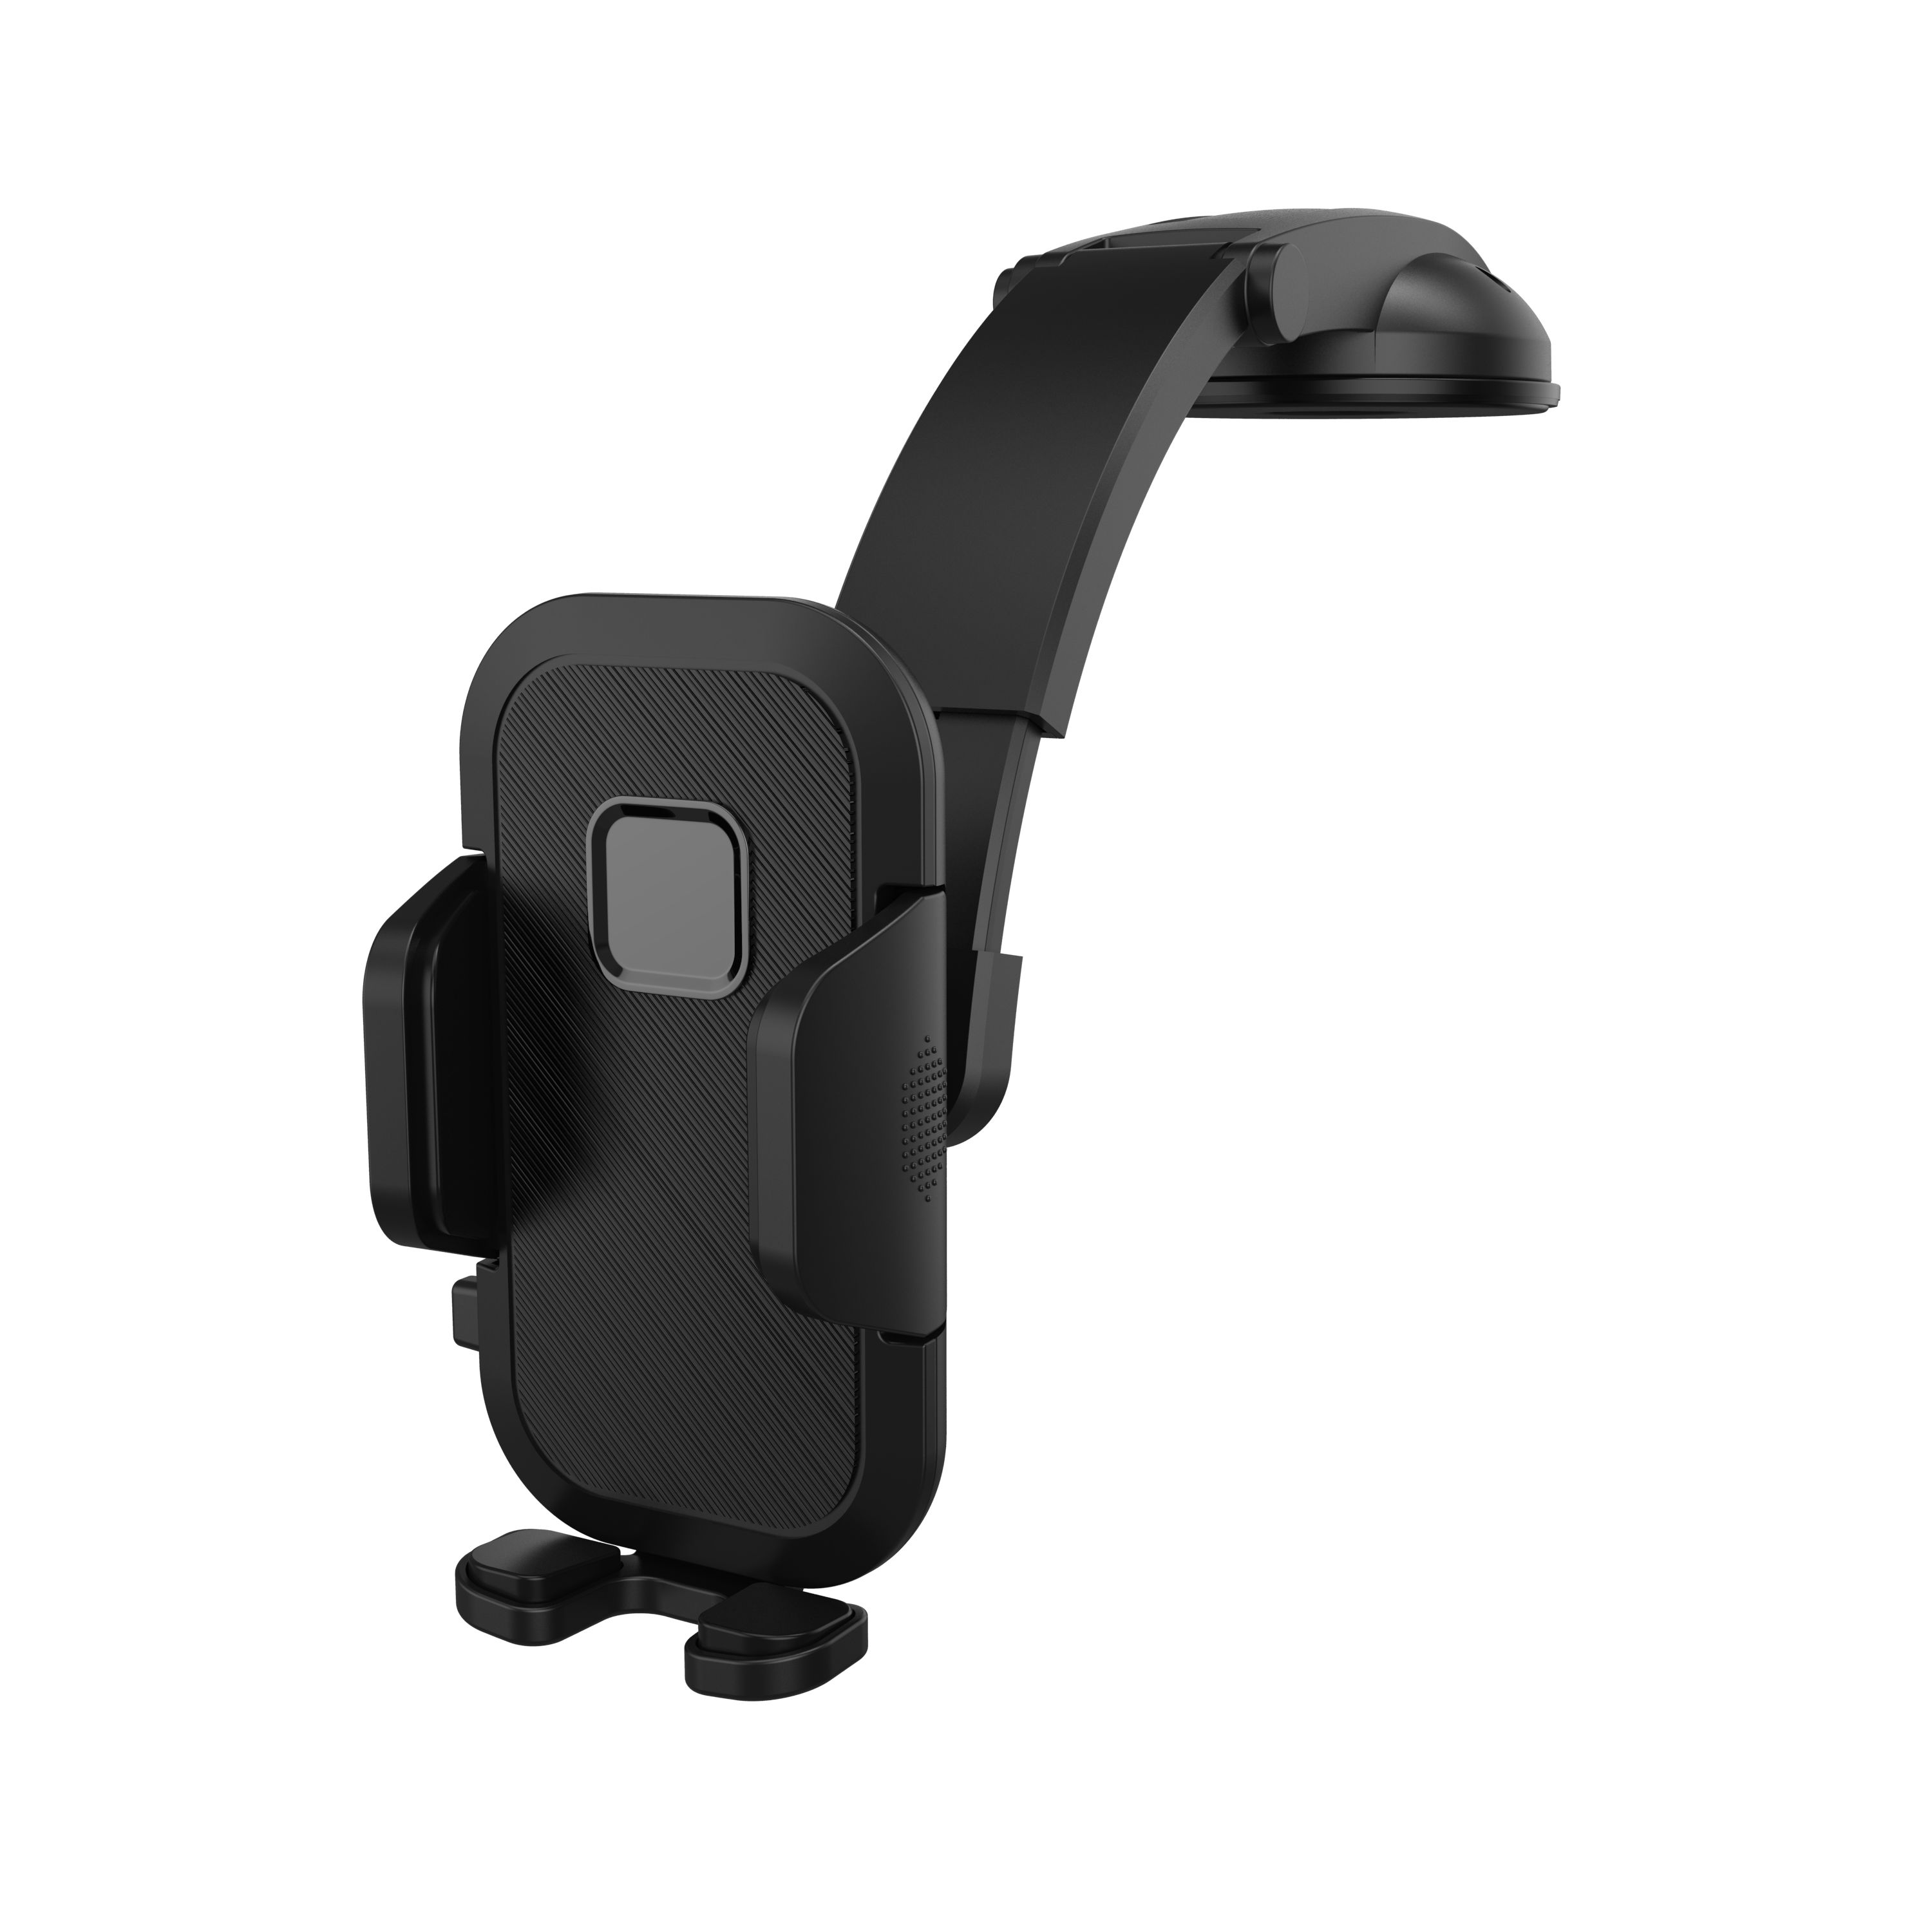 Dashboard Suction Cup Sticky Car CELL PHONE Holder Mount Hands Free C035-Clip (Black)